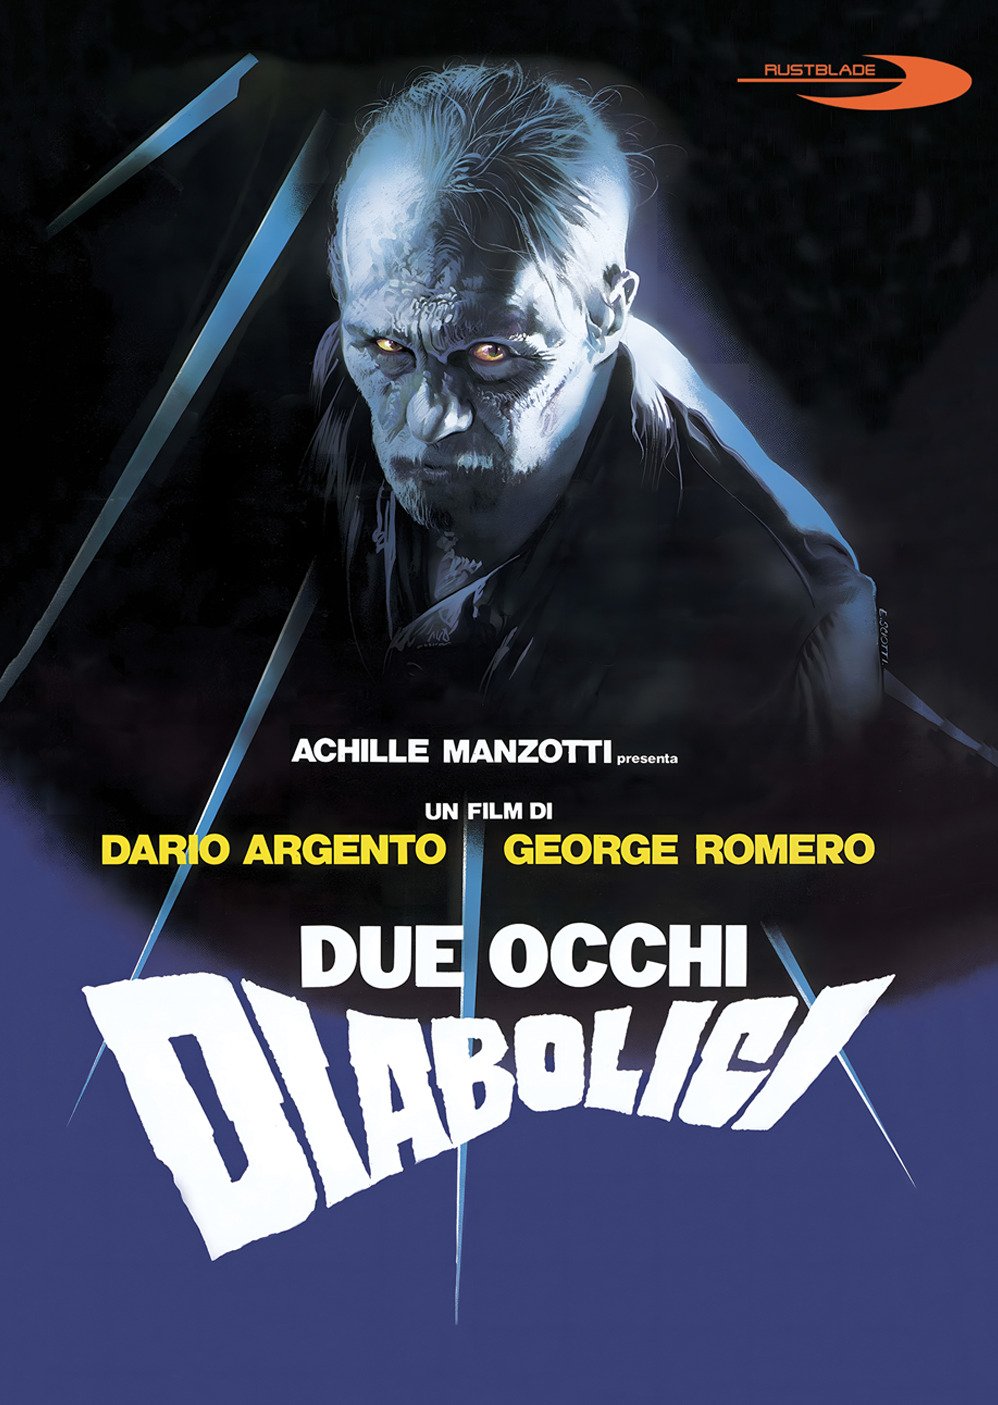 CD Shop - MOVIE DUE OCCHI DIABOLICI / TWO EVIL EYES